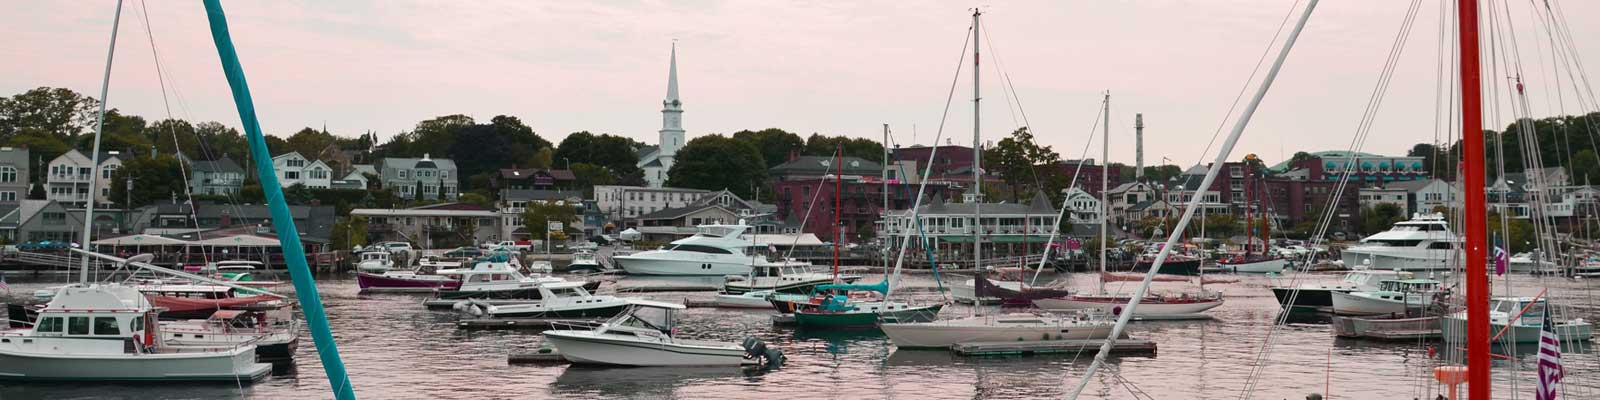 Enjoy the Down East Charm of Camden, Maine